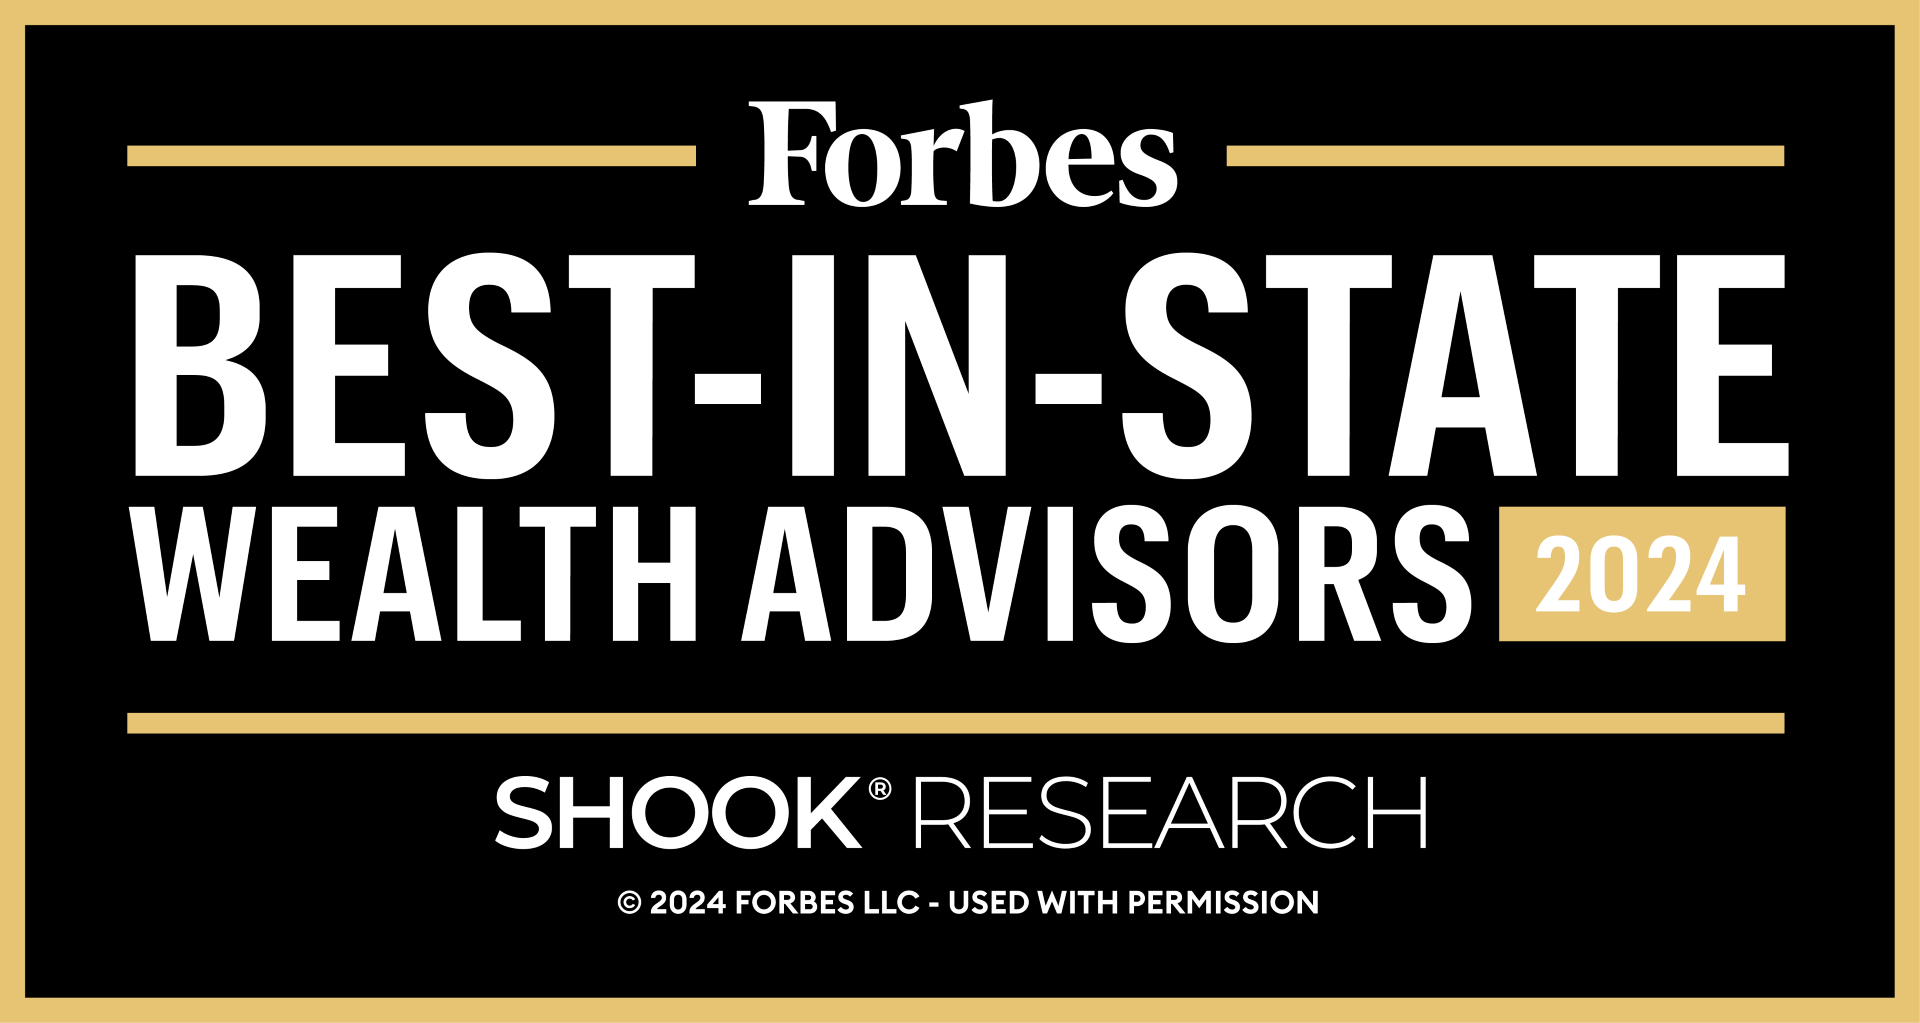 Earl Winthrop Recognized as Forbes Best-In-State Wealth Advisor